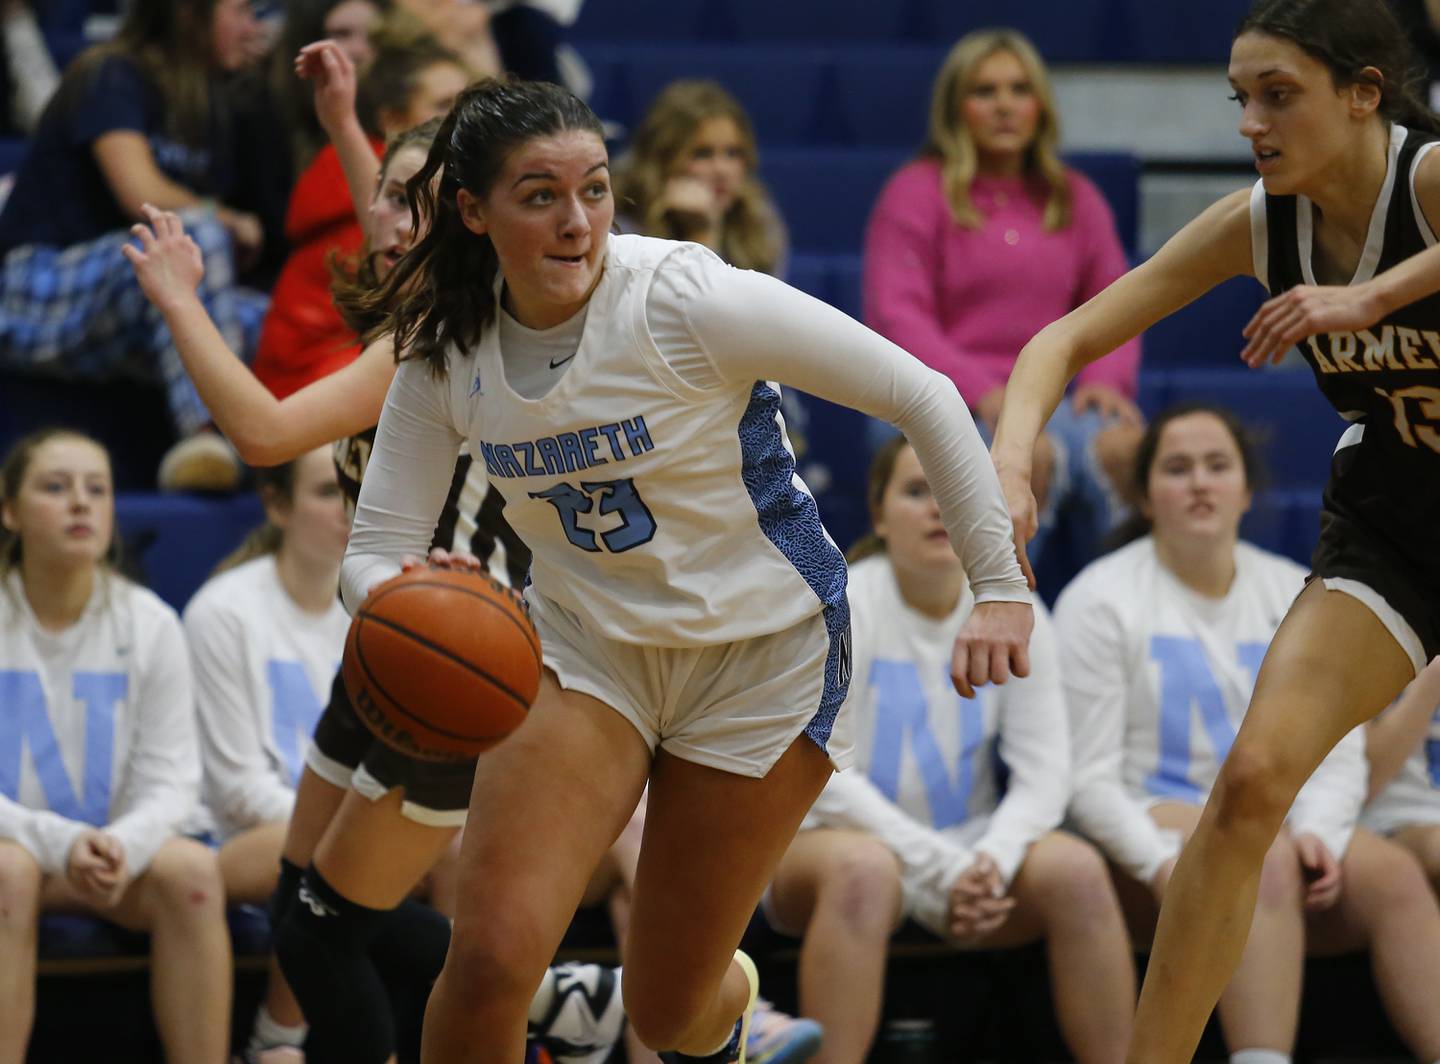 Nazareth's Danielle Scully (23) goes the the basket during the girls varsity basketball game between Carmel High School and Nazareth Academy on Wednesday, Dec. 7, 2022 in LaGrange, IL.